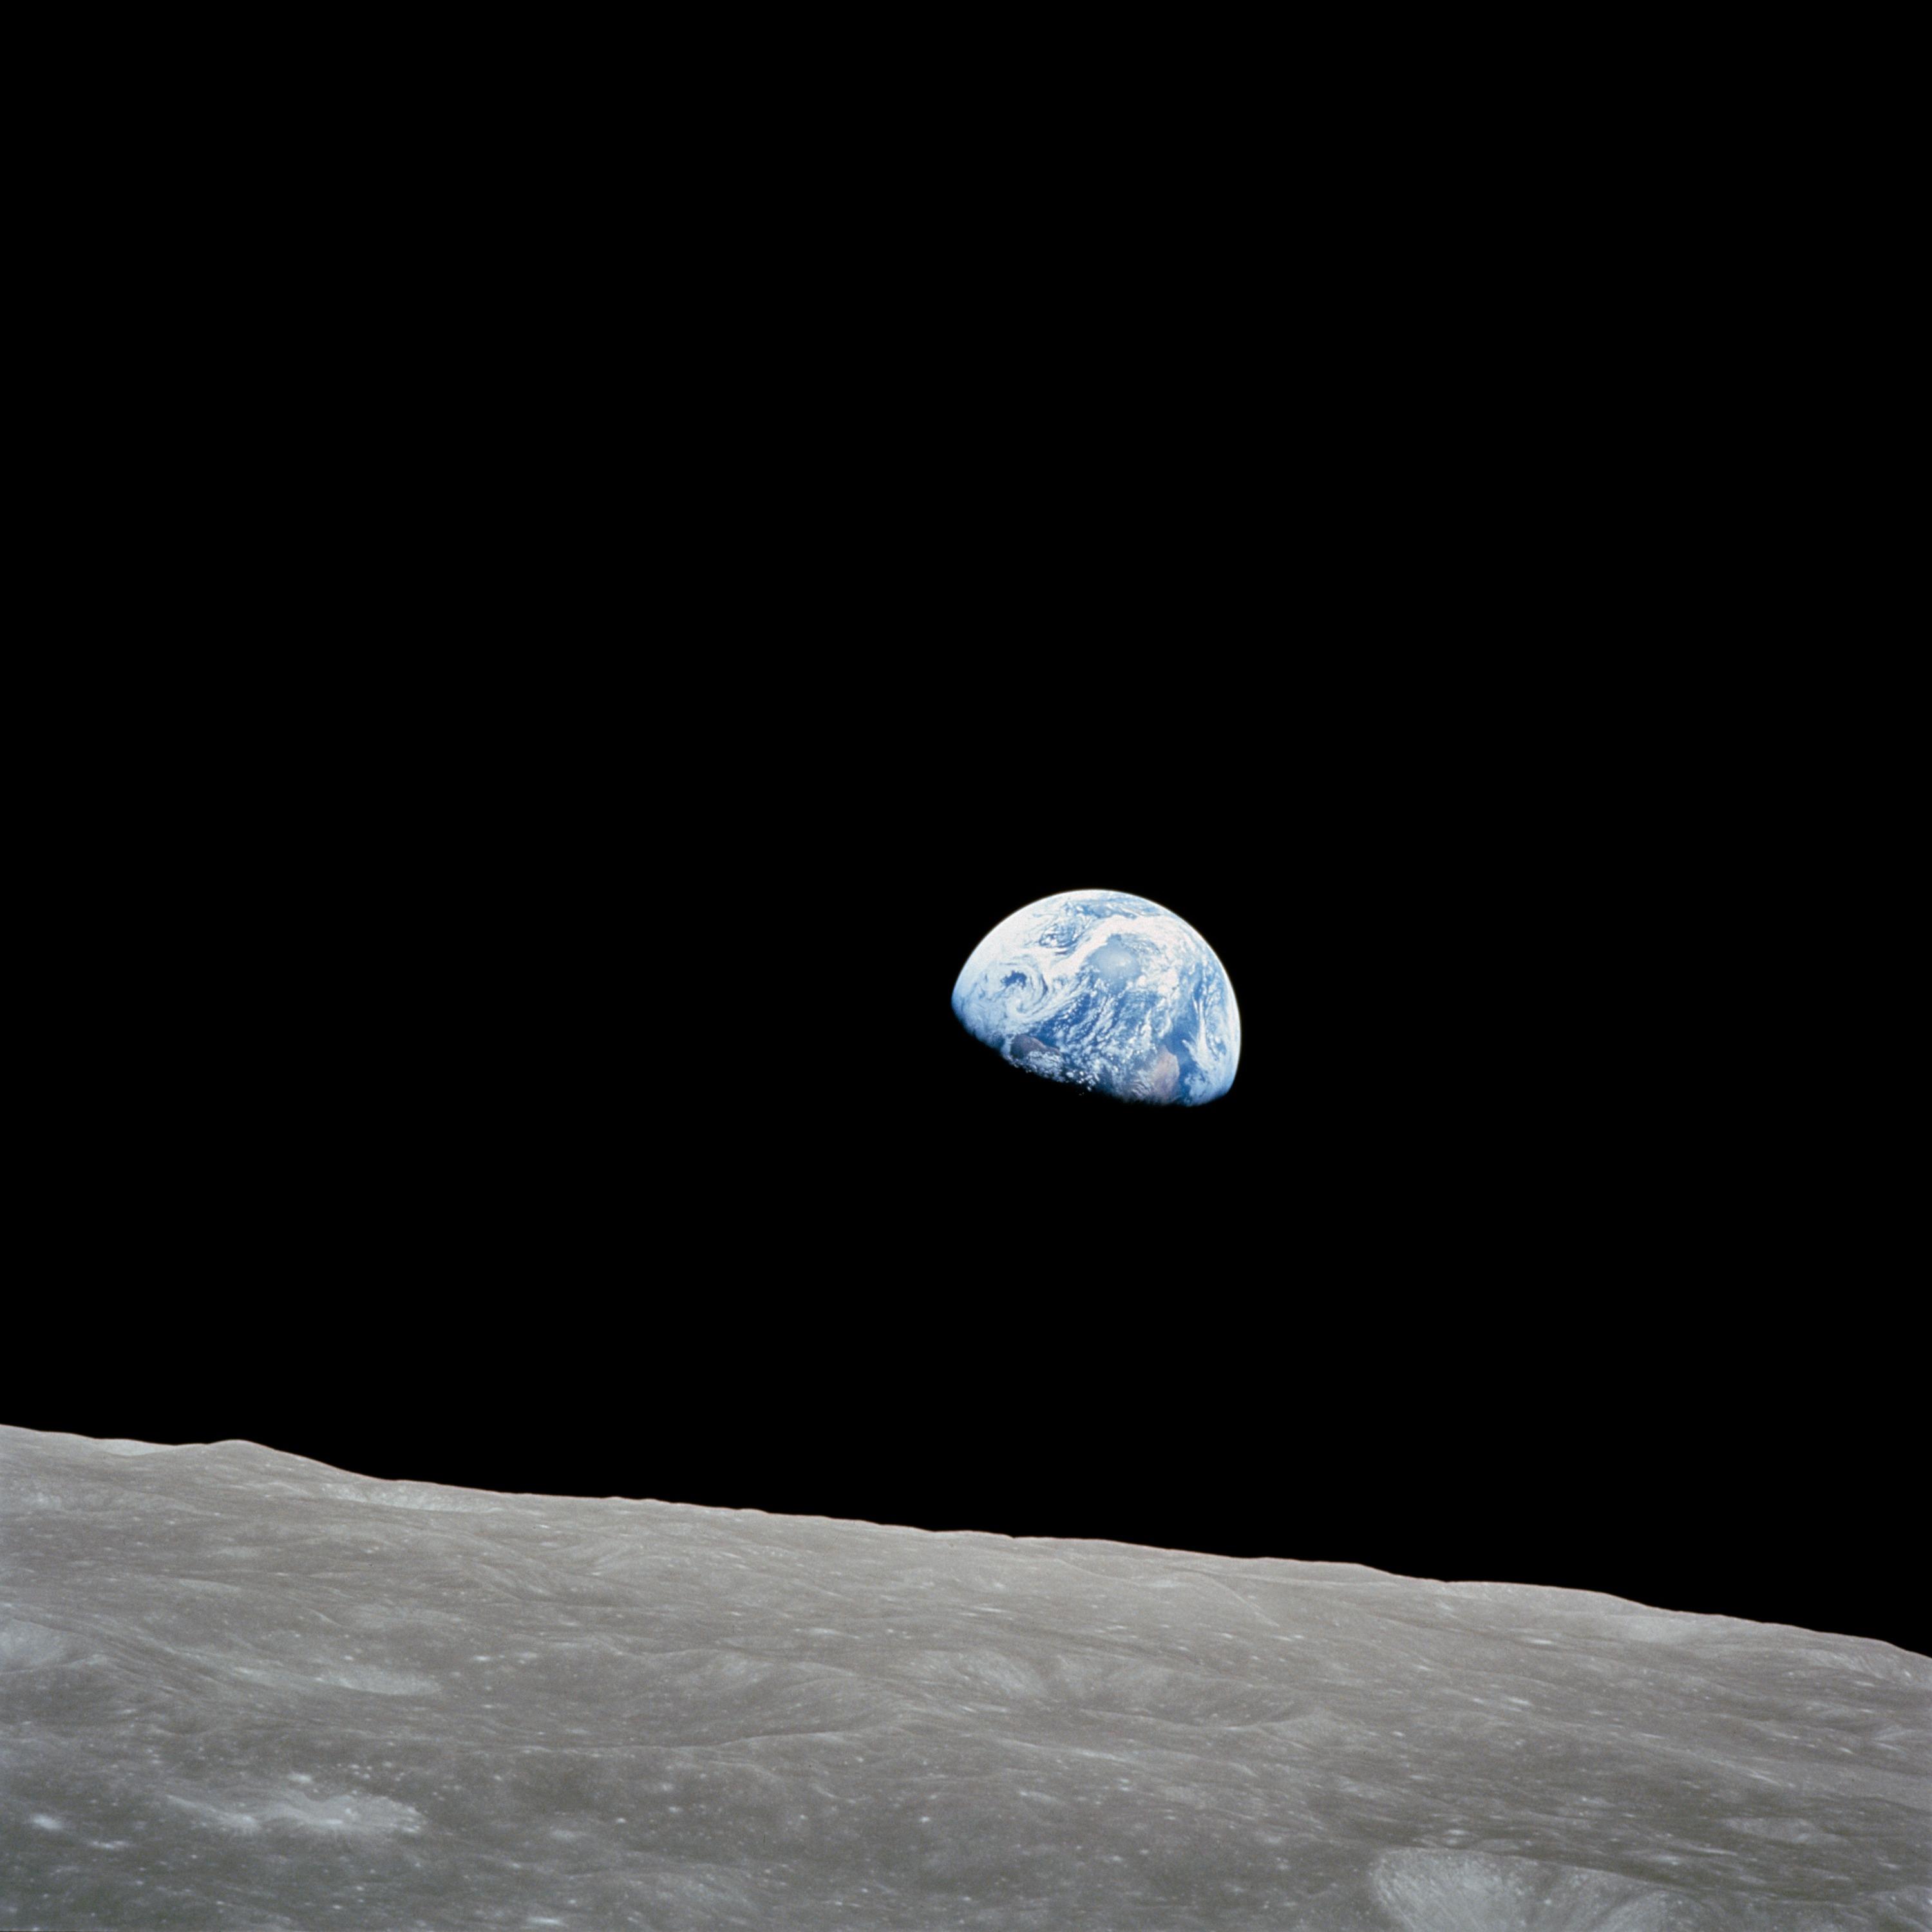 The Earth as seen from the Moon. The image was titled Earthrise